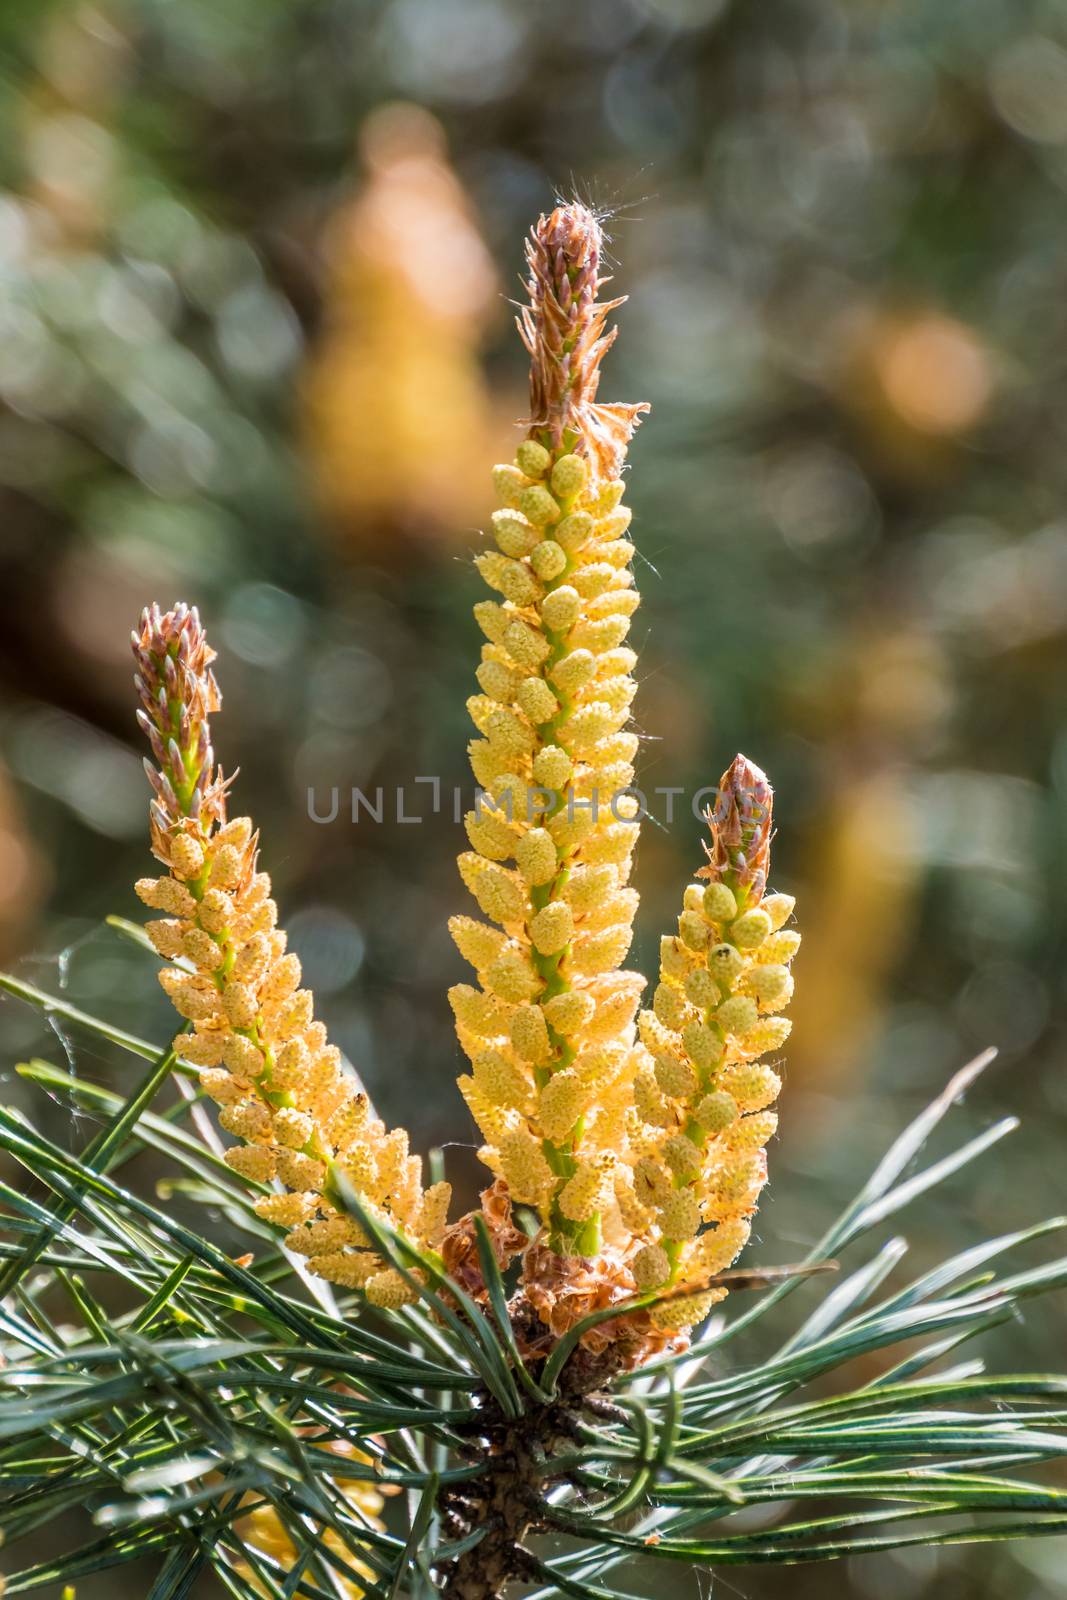 New shoots of pine tree in spring yellow